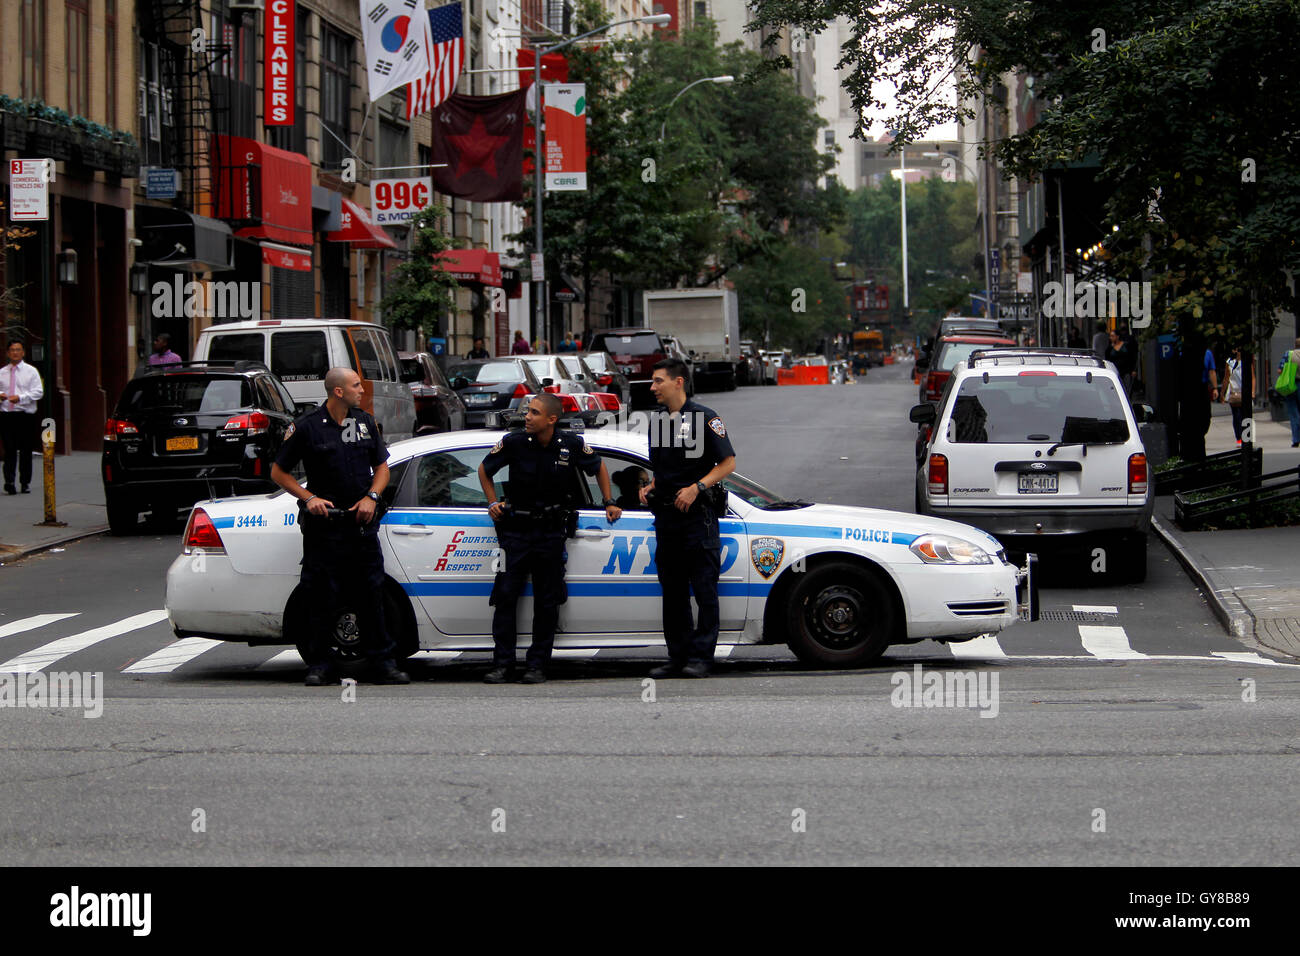 New York, United States. 18th Sep, 2016. Police guard a street in Chelsea near the scene of last night's explosion on New York's West 23rd Street between 6th and 7th Avenues in the Chelsea section of Manhattan. 29 people were injured in the blast which has been described by officials as intentional. Credit:  Adam Stoltman/Alamy Live News Stock Photo